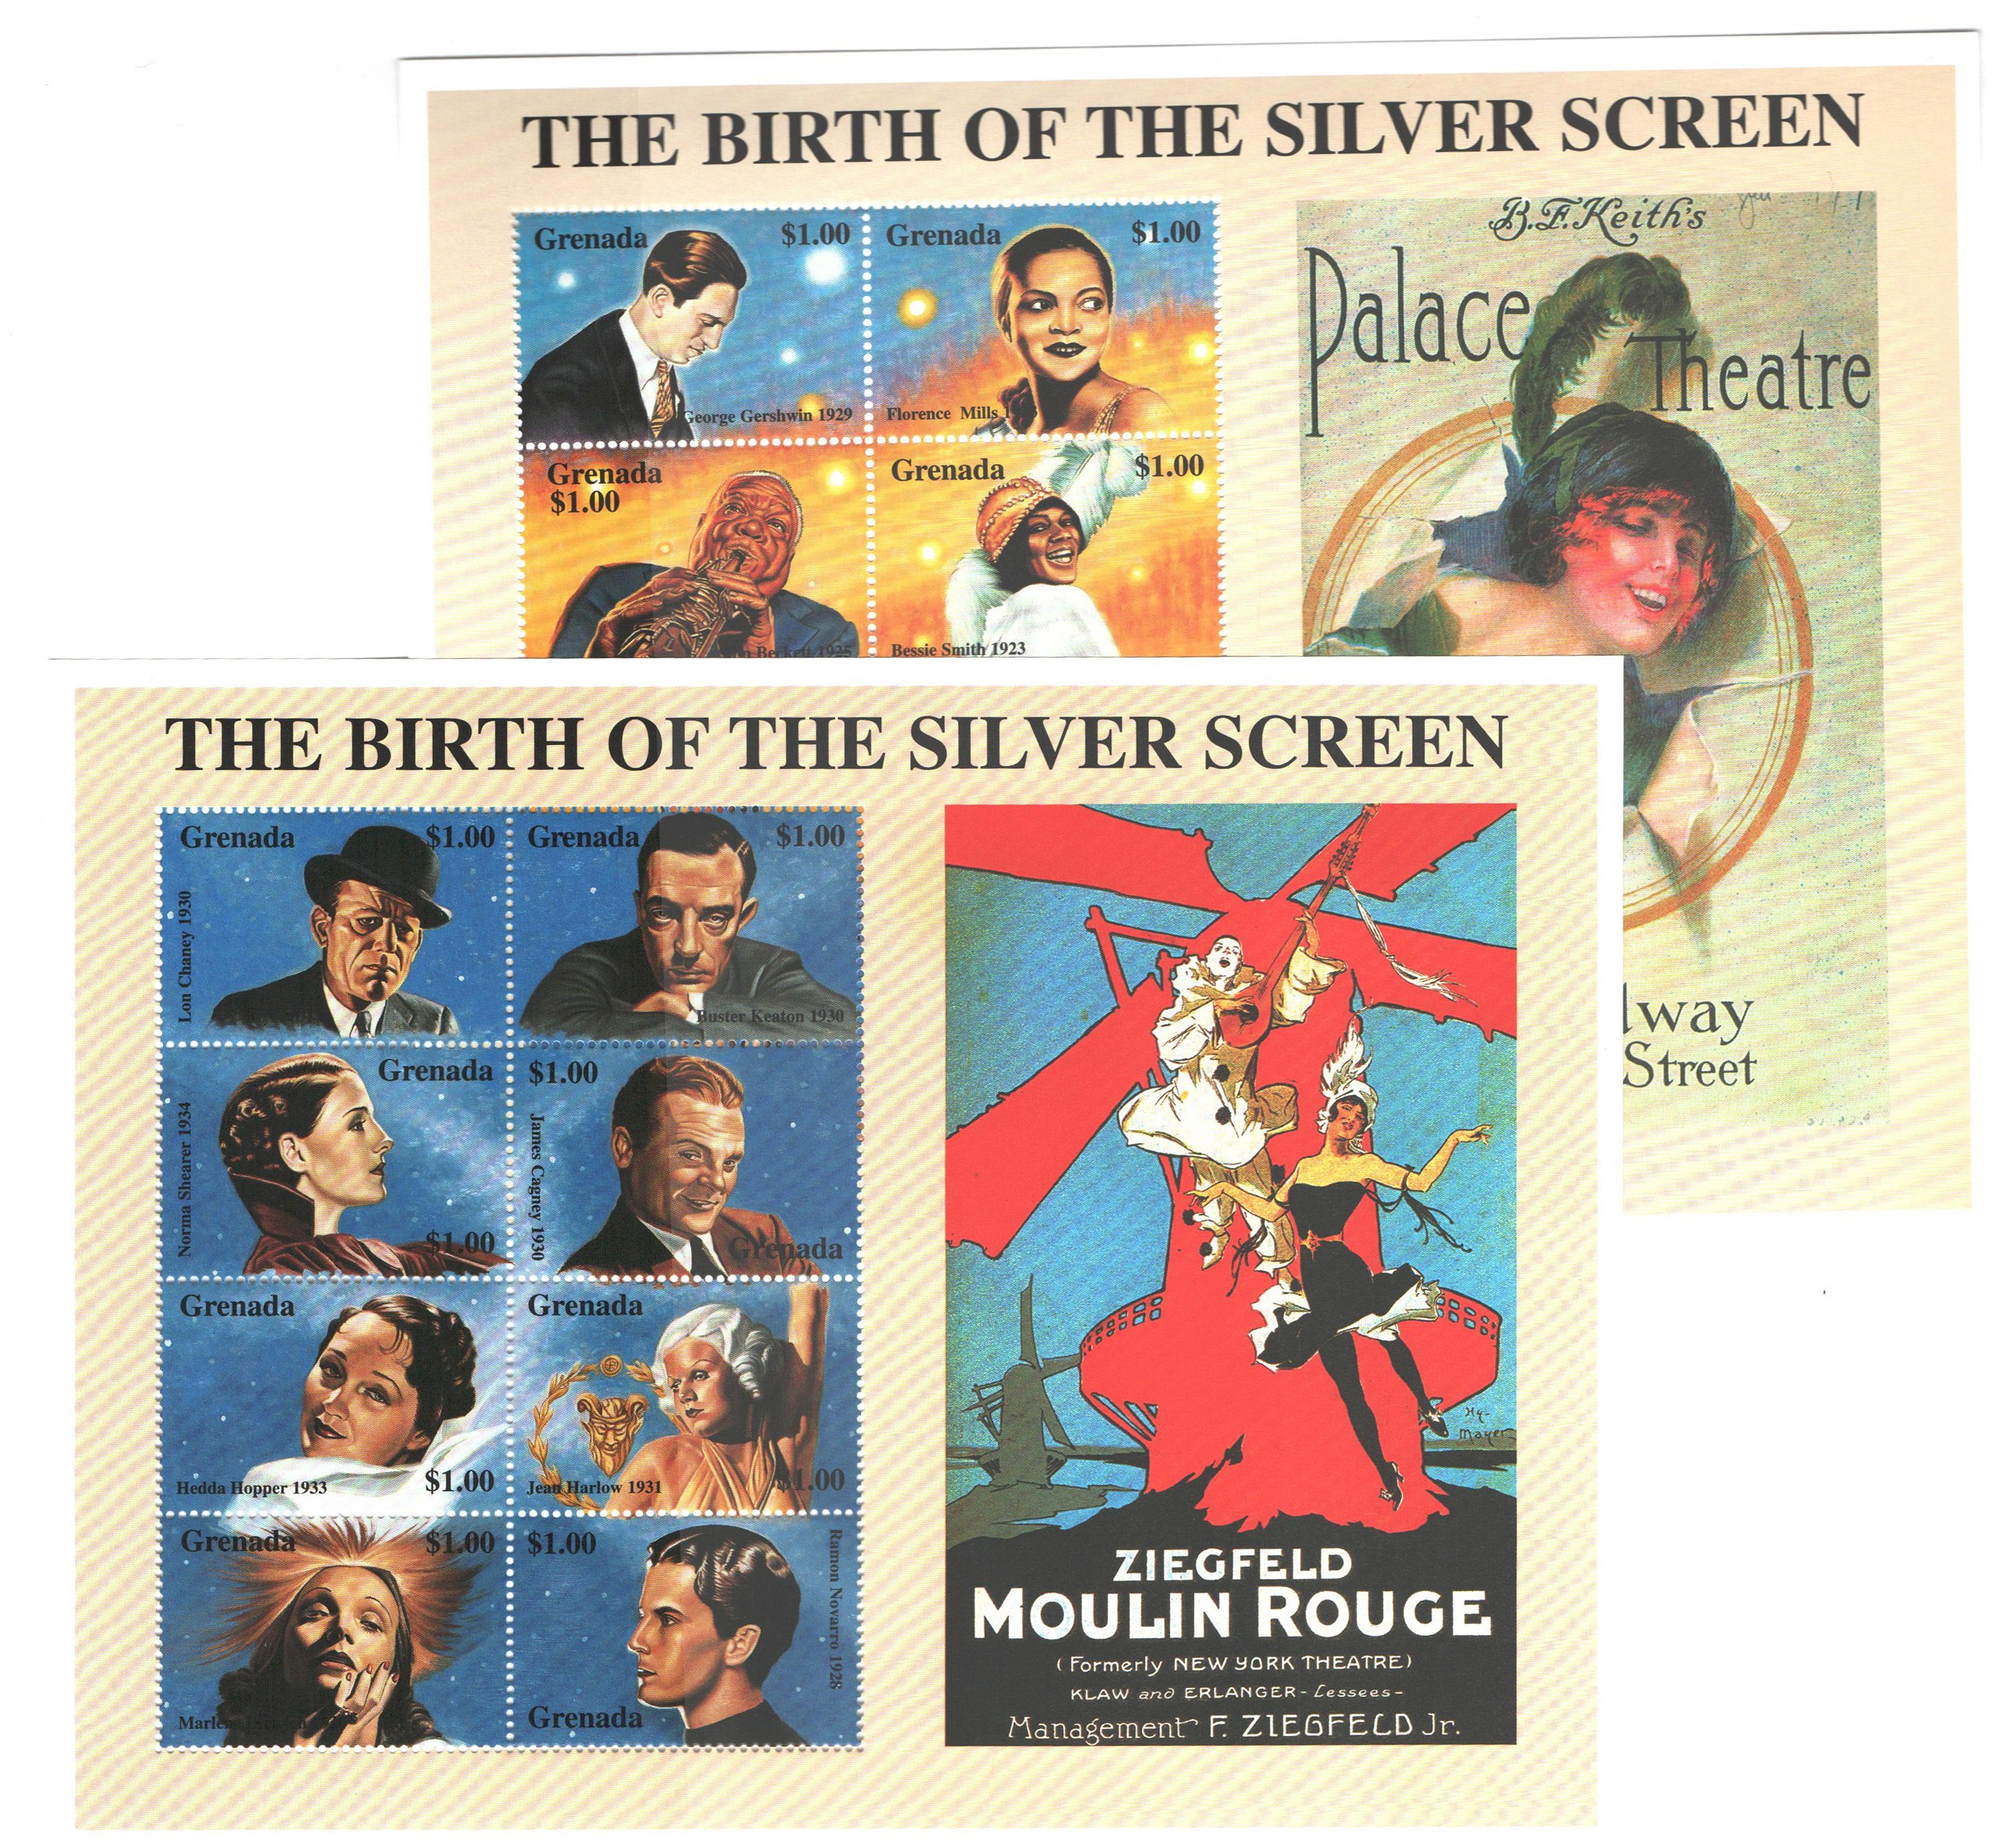 1999 Grenada Birth of the Silver Screen stamps